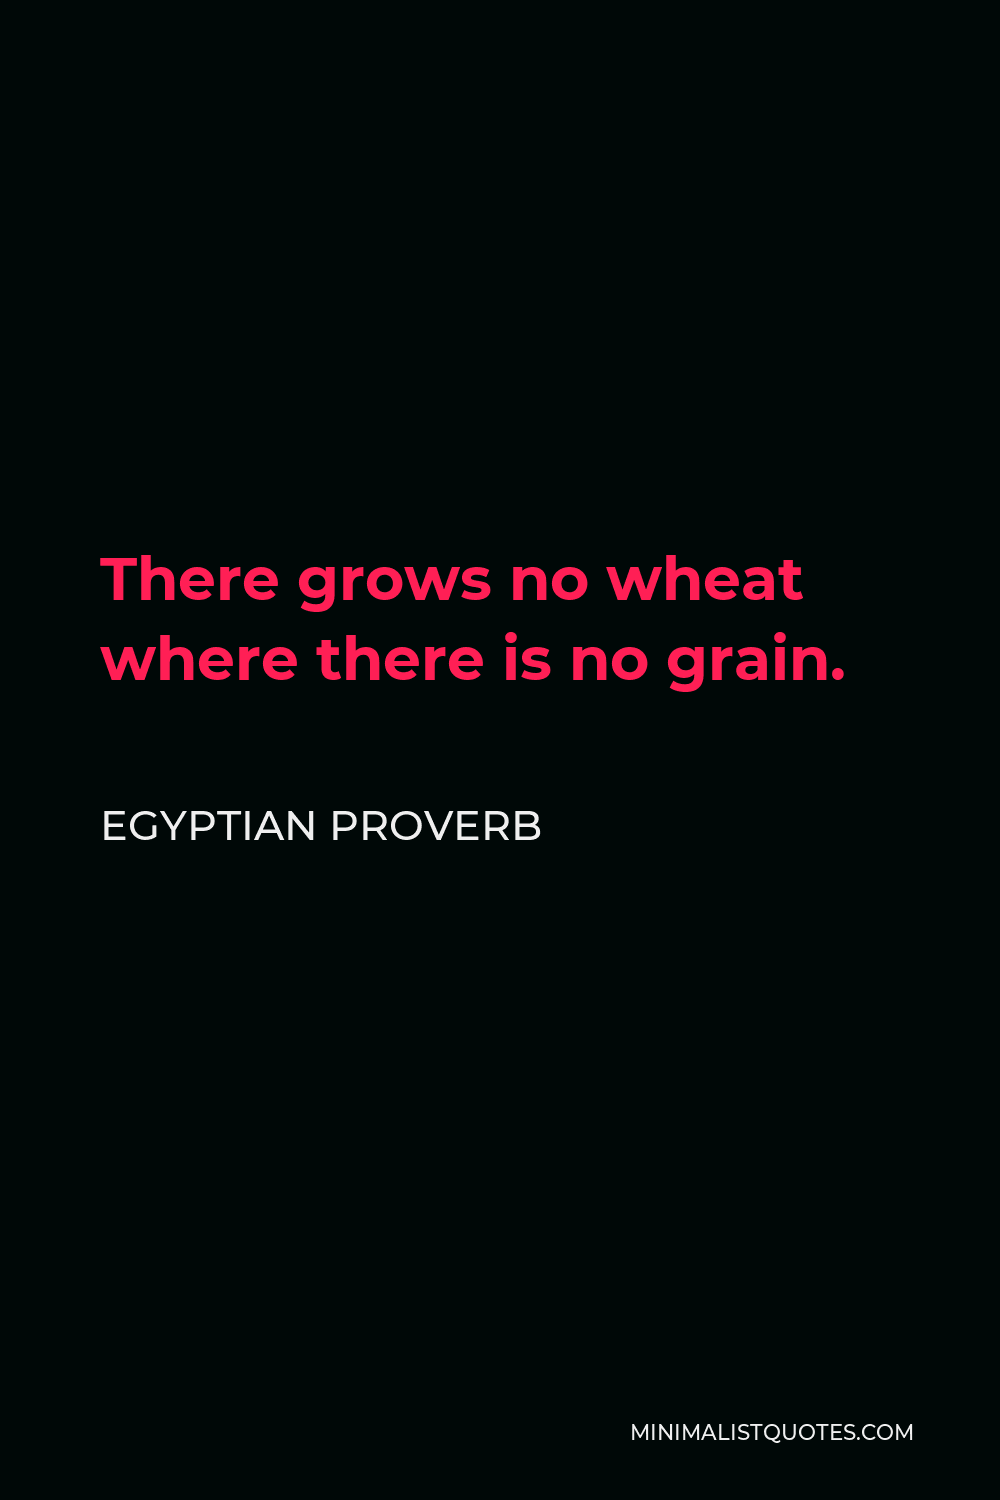 Egyptian Proverb Quote - There grows no wheat where there is no grain.